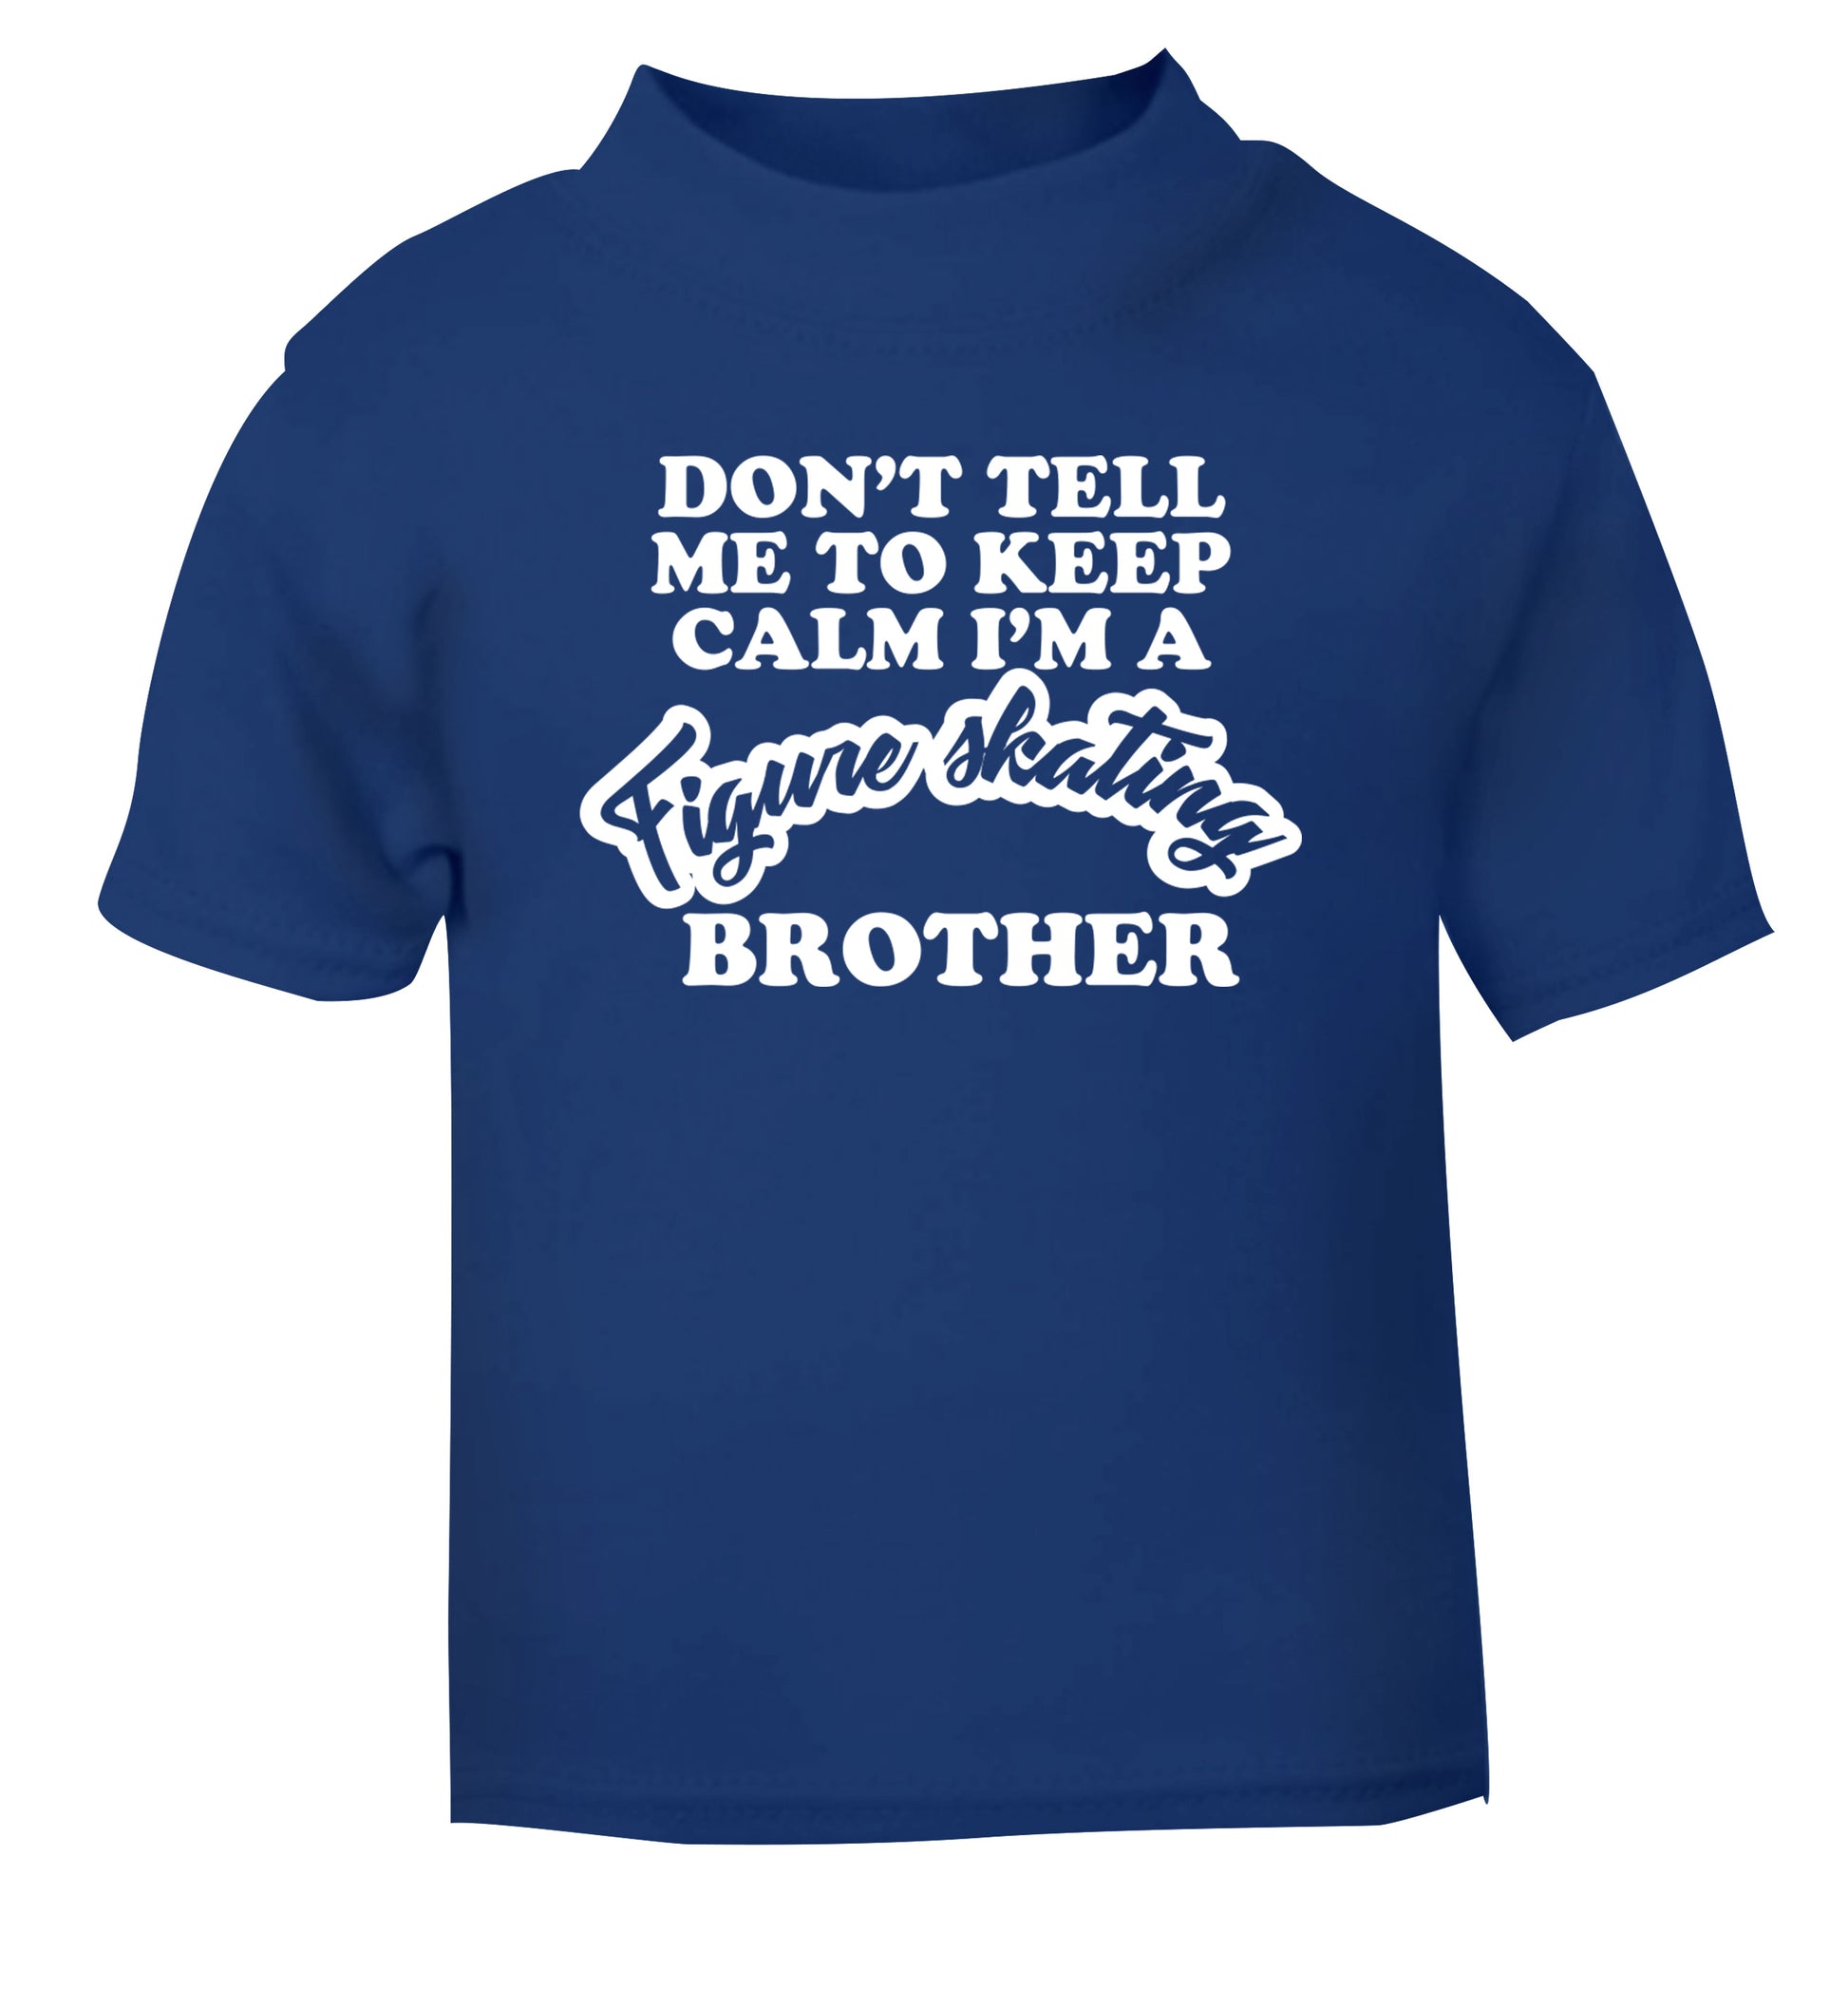 Don't tell me to keep calm I'm a figure skating brother blue Baby Toddler Tshirt 2 Years